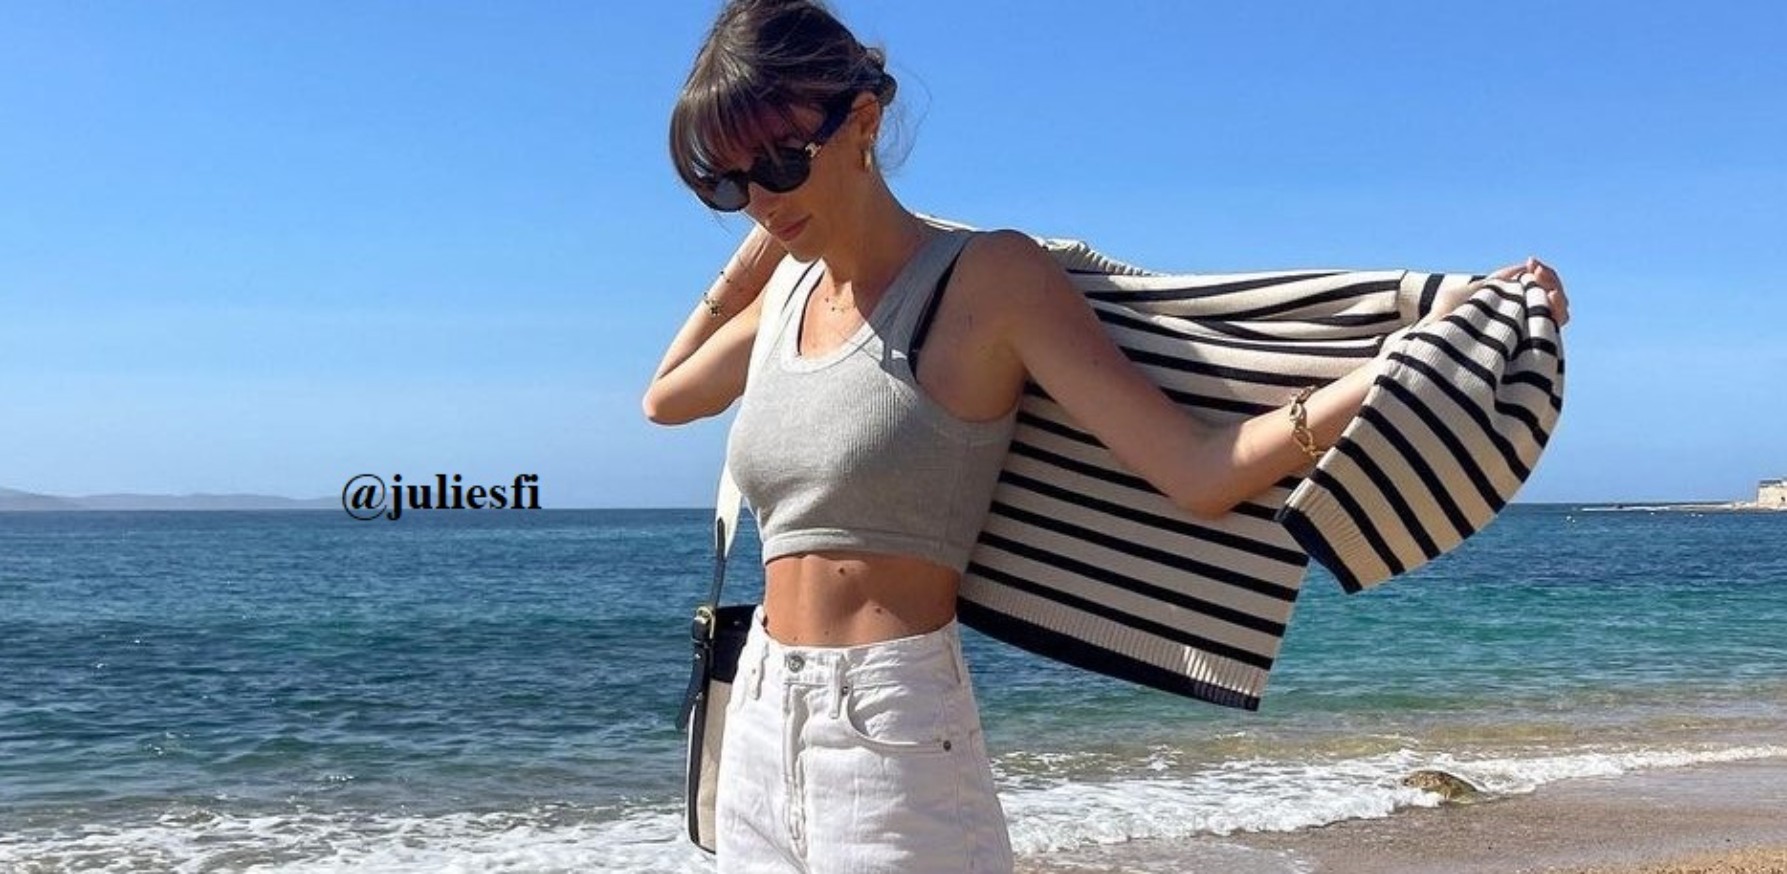 Awesome Crop Tops You Can Sport This Summer